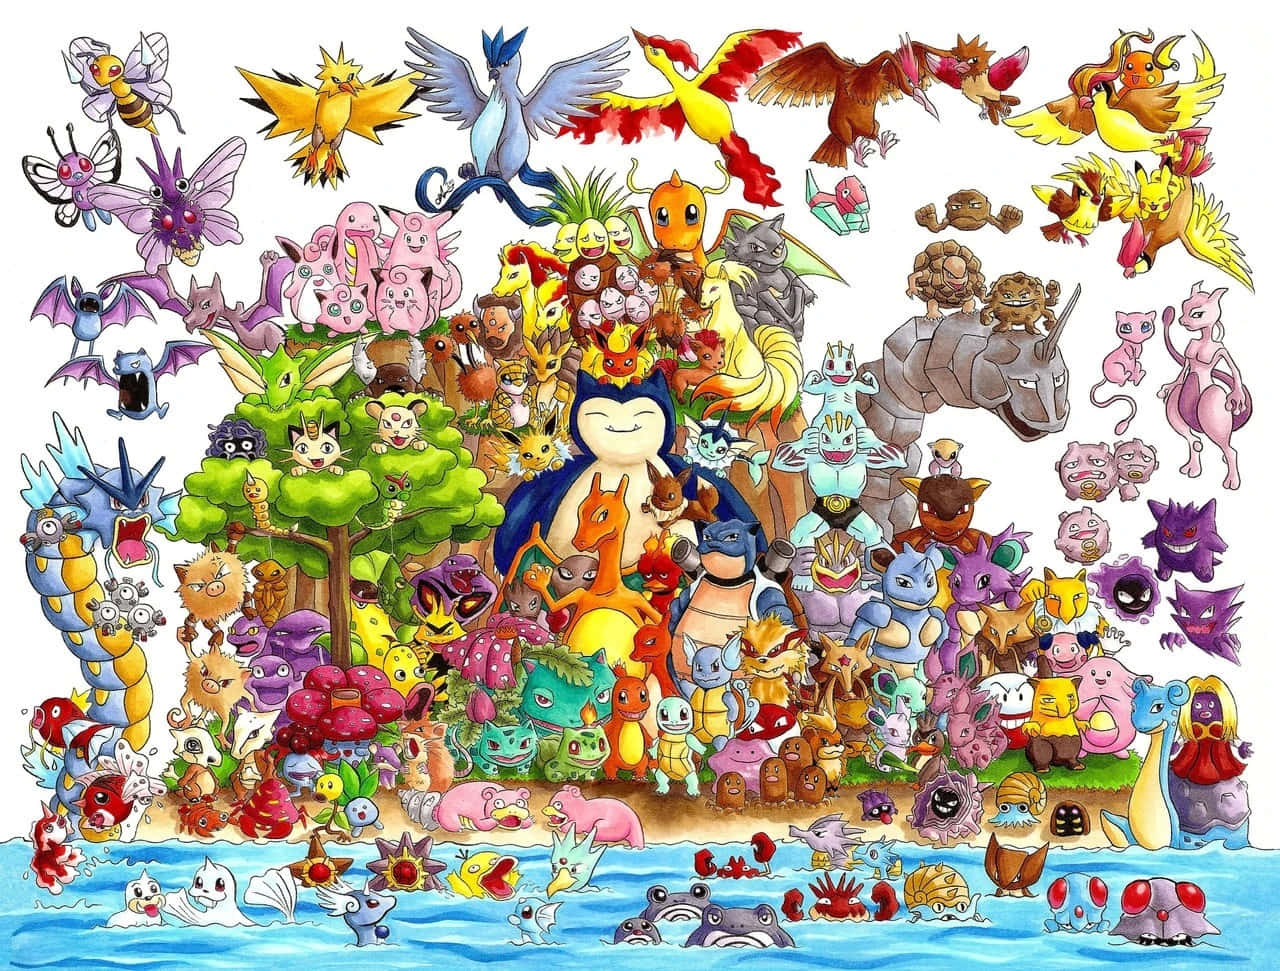 Cutest All Pokemon Characters!